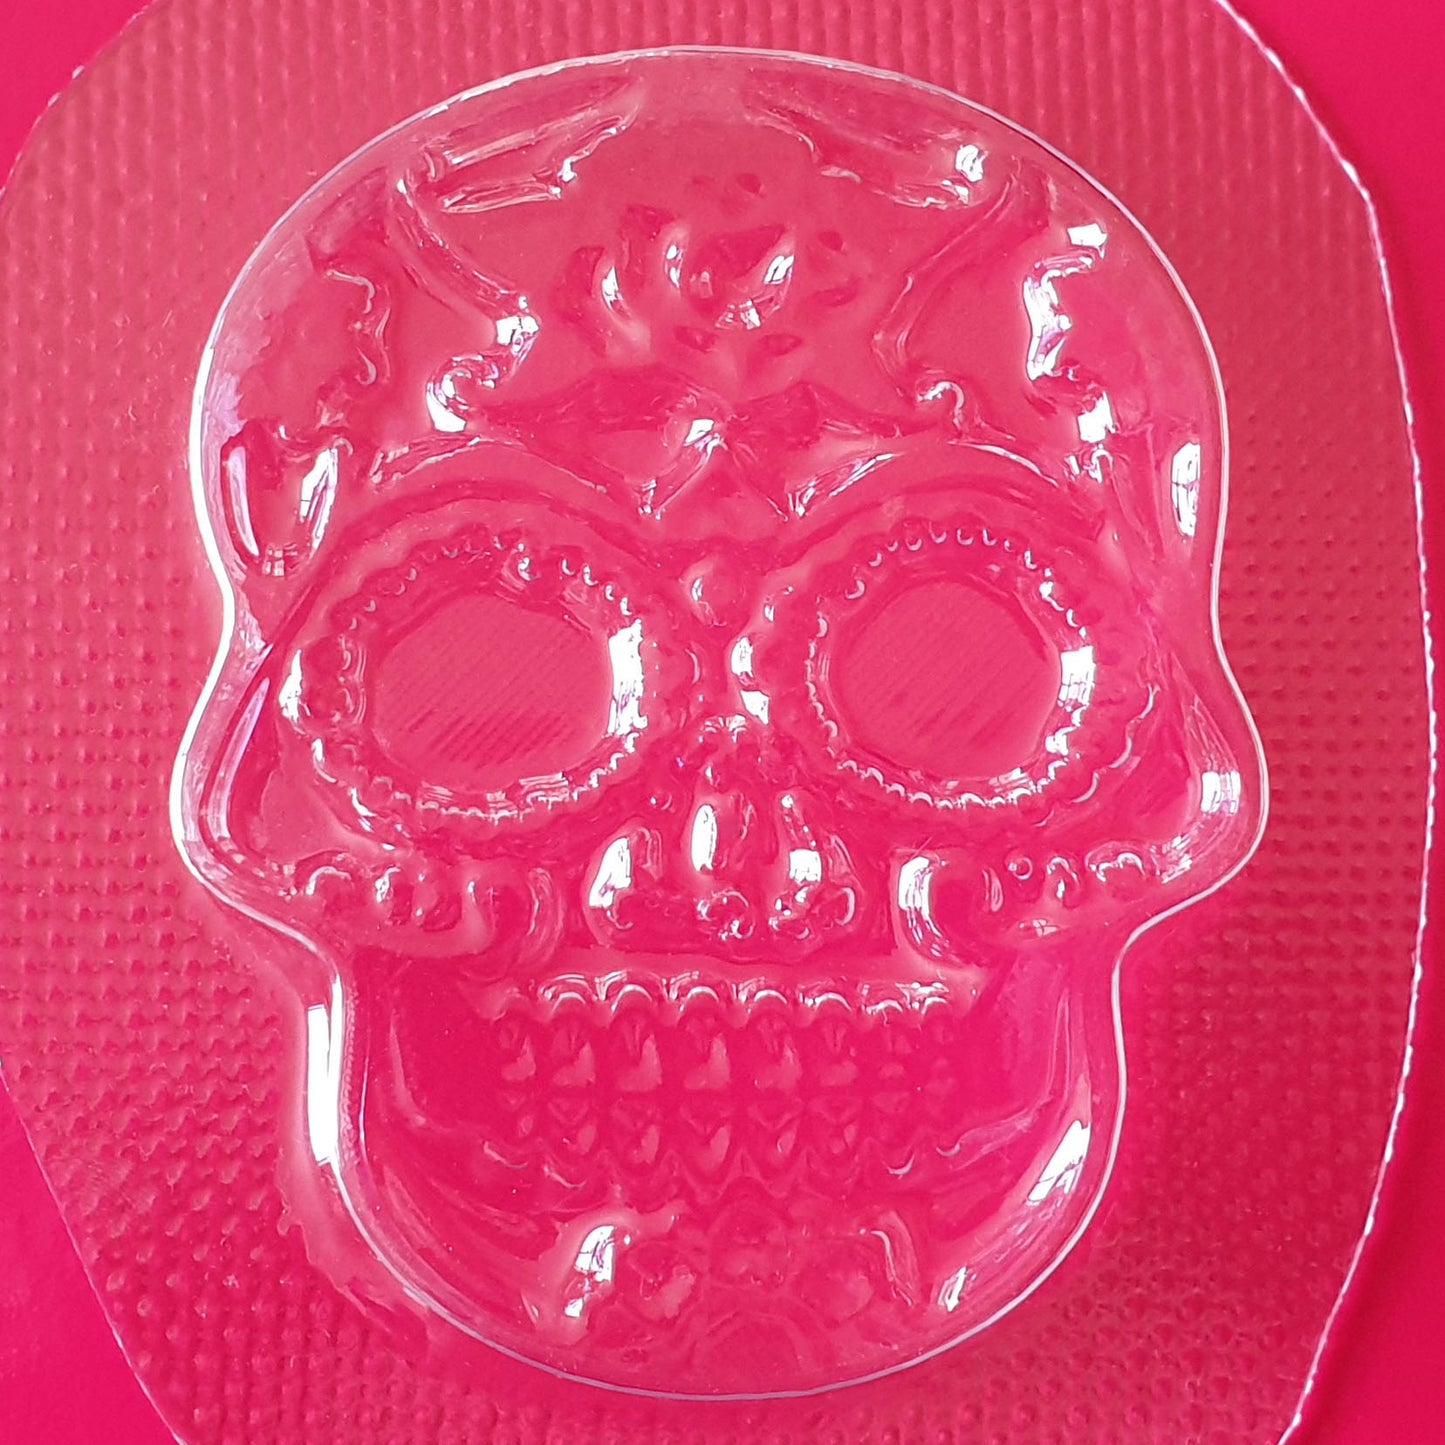 Candy Skull Mould | Truly Personal | Bath Bomb, Soap, Resin, Chocolate, Jelly, Wax Melts Mold